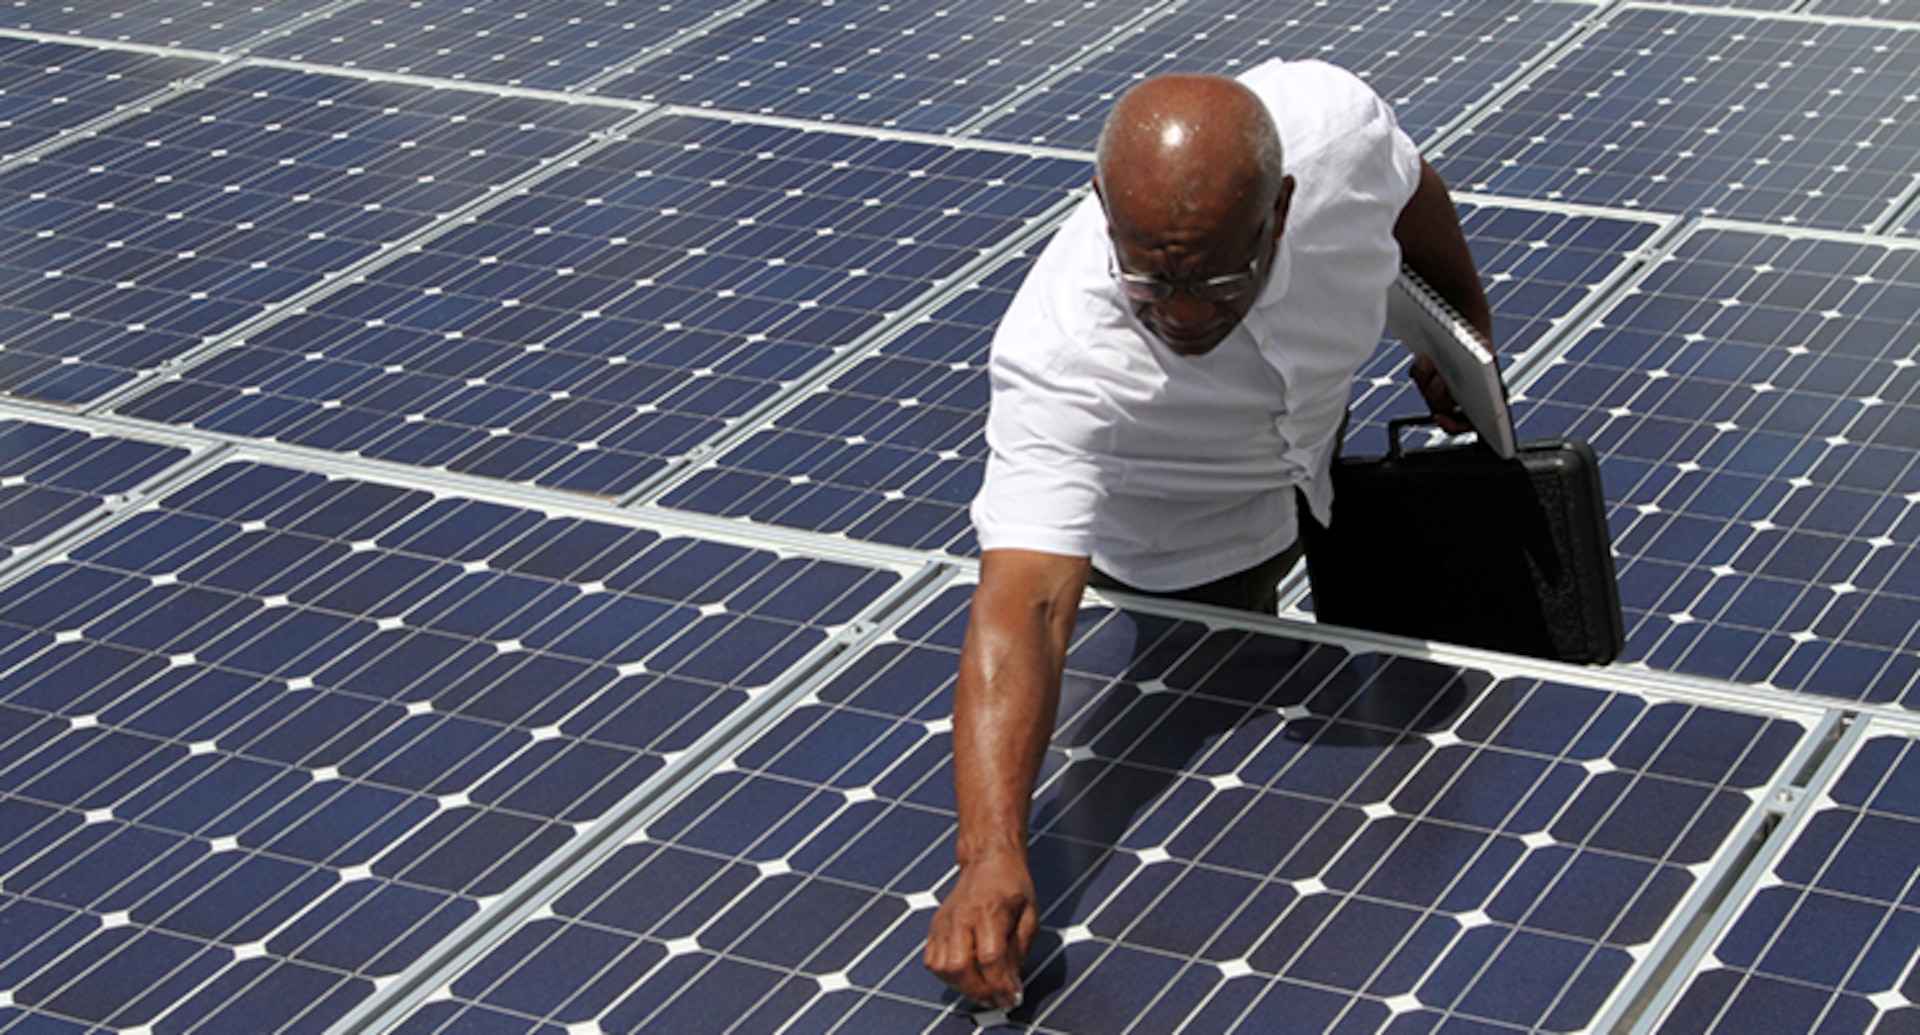 Ronald Gooch, energy specialist for the Ohio Adjutant General’s Department, inspects one of the more than 300 solar panels at the Maj. Gen. Robert S. Beightler Armory Aug. 11, 2016, in Columbus, Ohio. Solar power has been a part of the Ohio National Guard’s efforts to reduce energy consumption since 2009, with solar arrays currently at seven facilities throughout the state and plans to expand further.